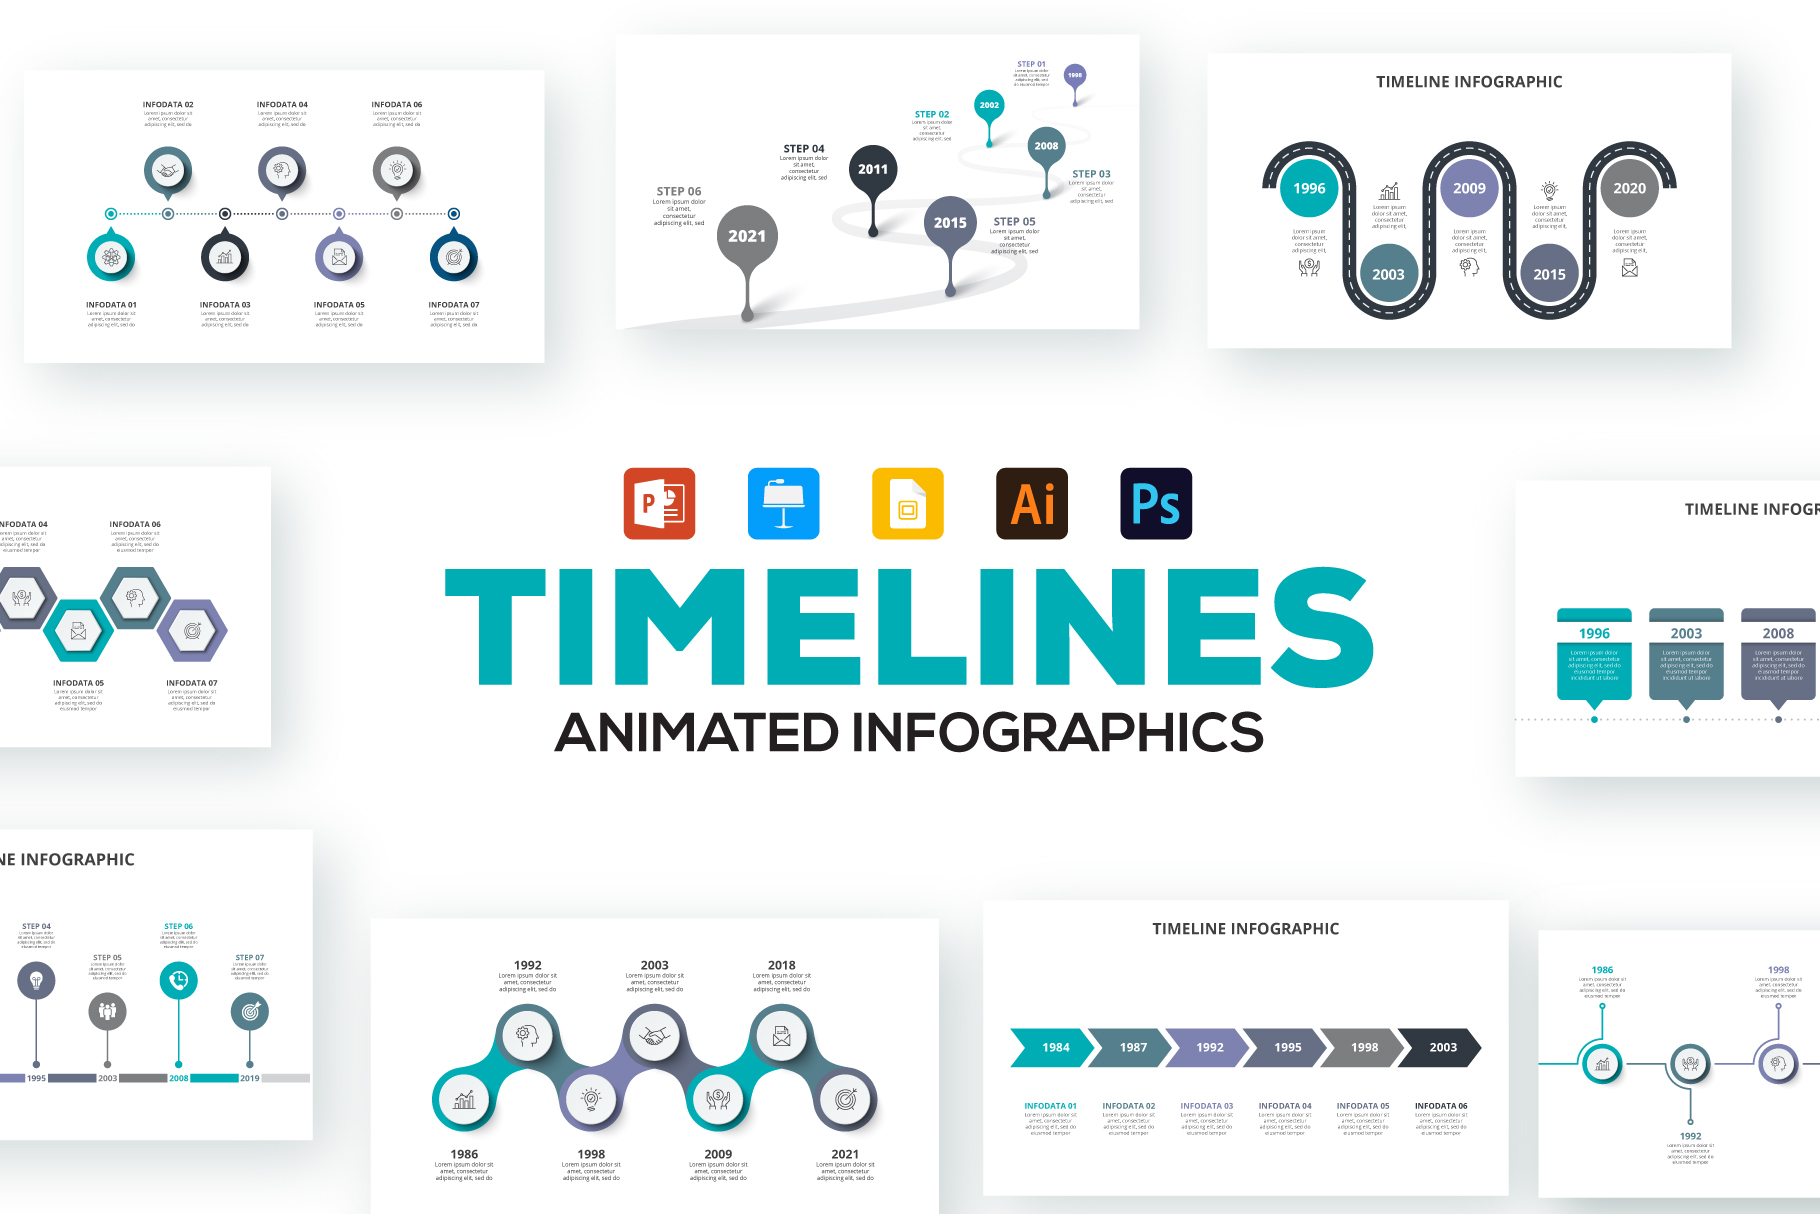 Timelines animated infographics.